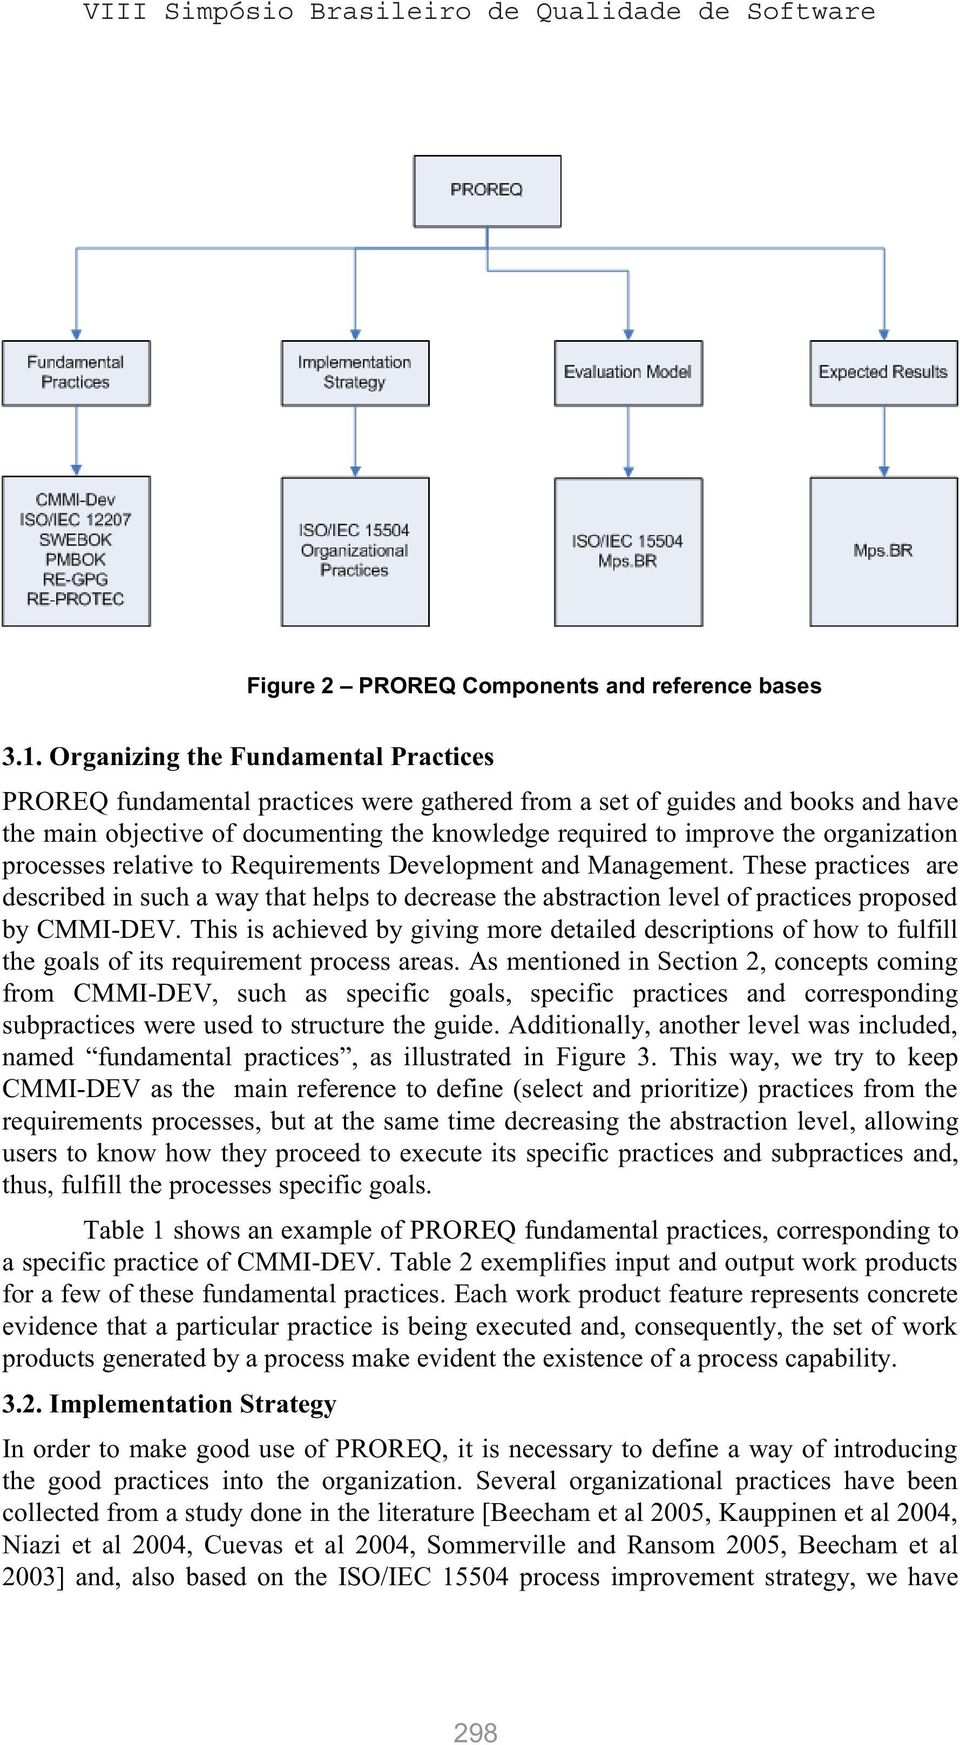 organization processes relative to Requirements Development and Management. These practices are described in such a way that helps to decrease the abstraction level of practices proposed by CMMI-DEV.